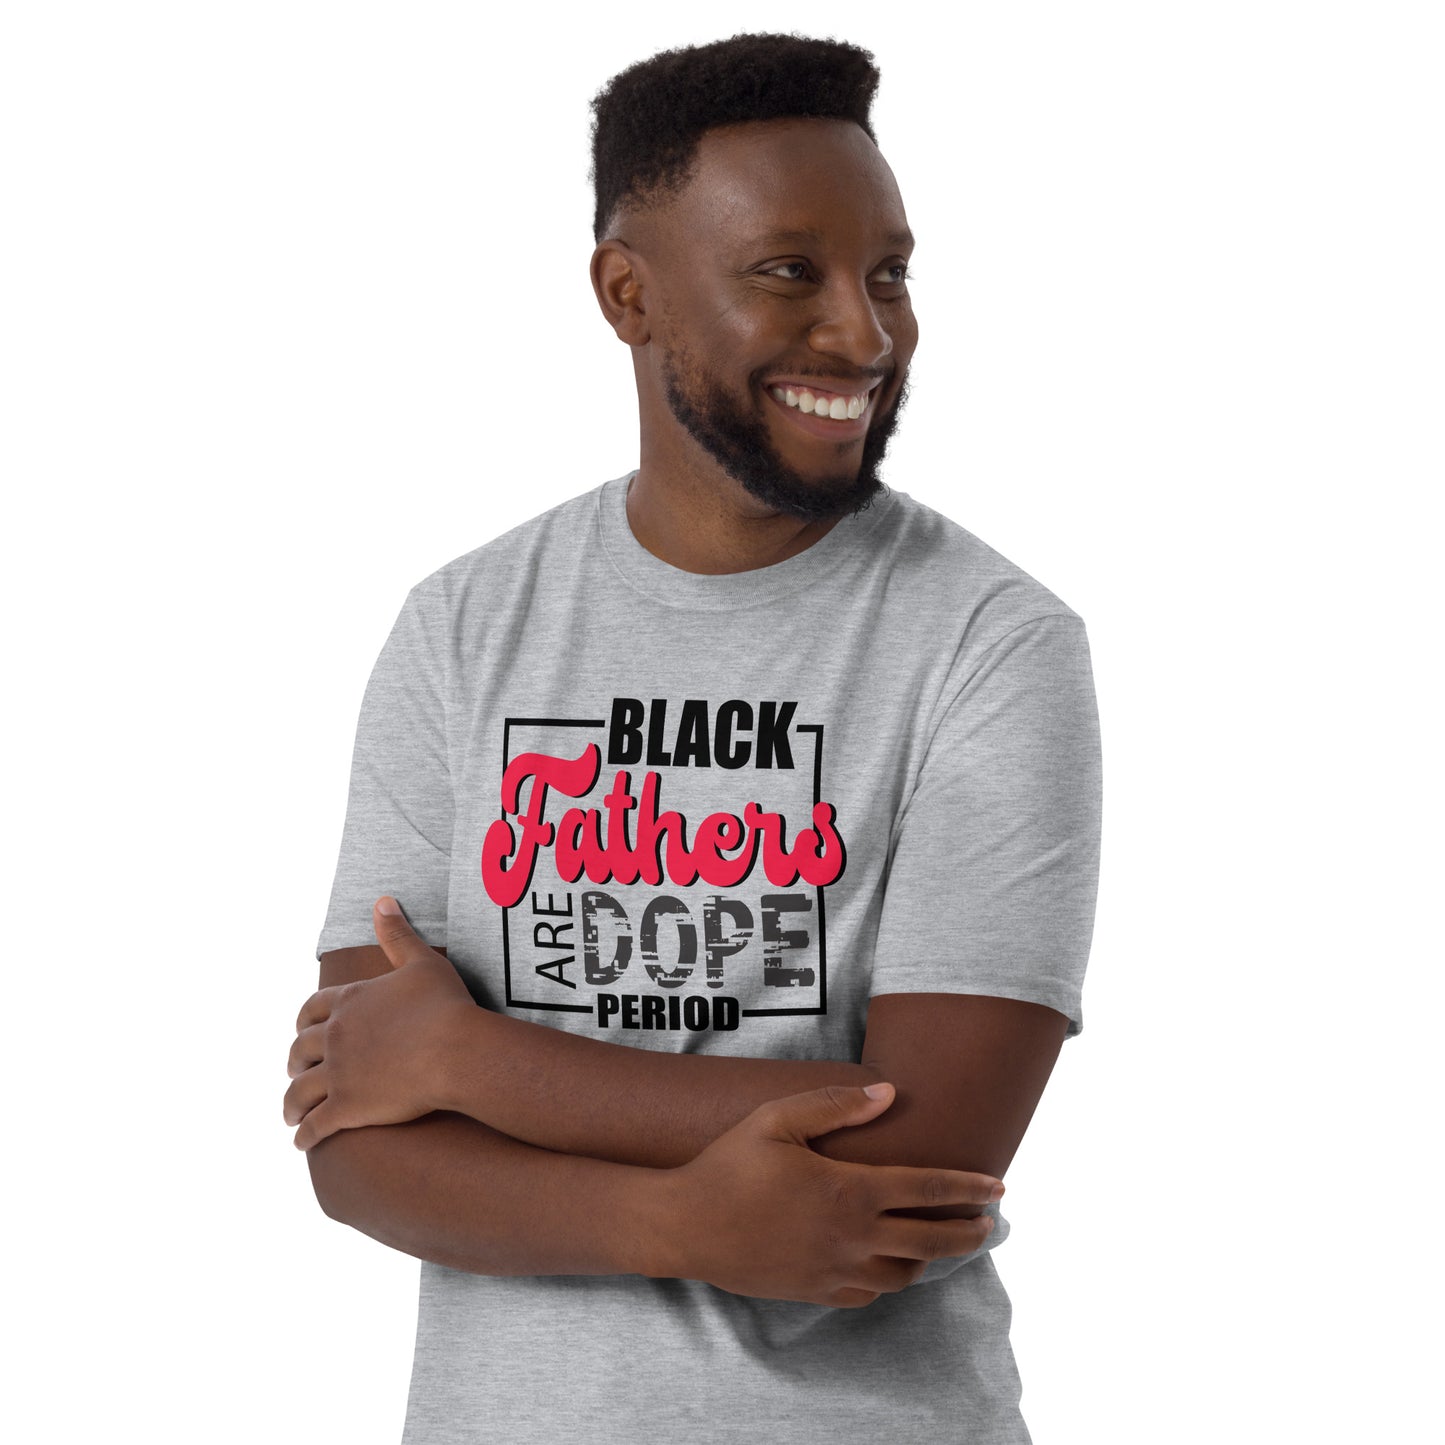 "Black Fathers Are Dope Period" Unisex T-Shirt